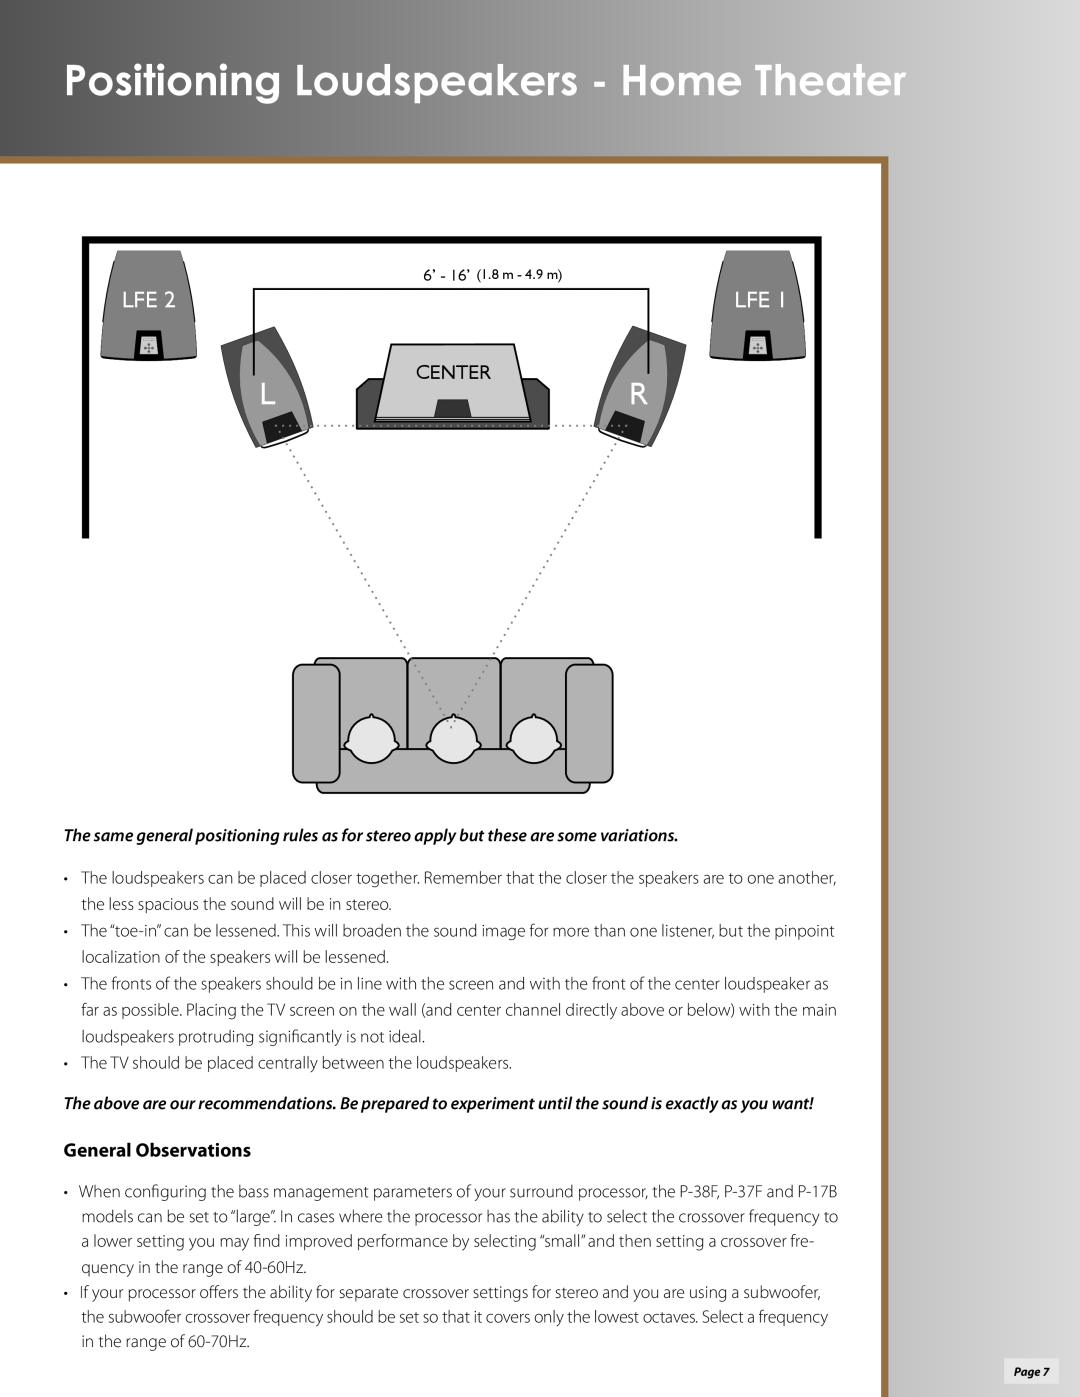 Klipsch P-38F, P-37F, P-27S, P-27C, P-17B owner manual Positioning Loudspeakers - Home Theater, General Observations, Center 